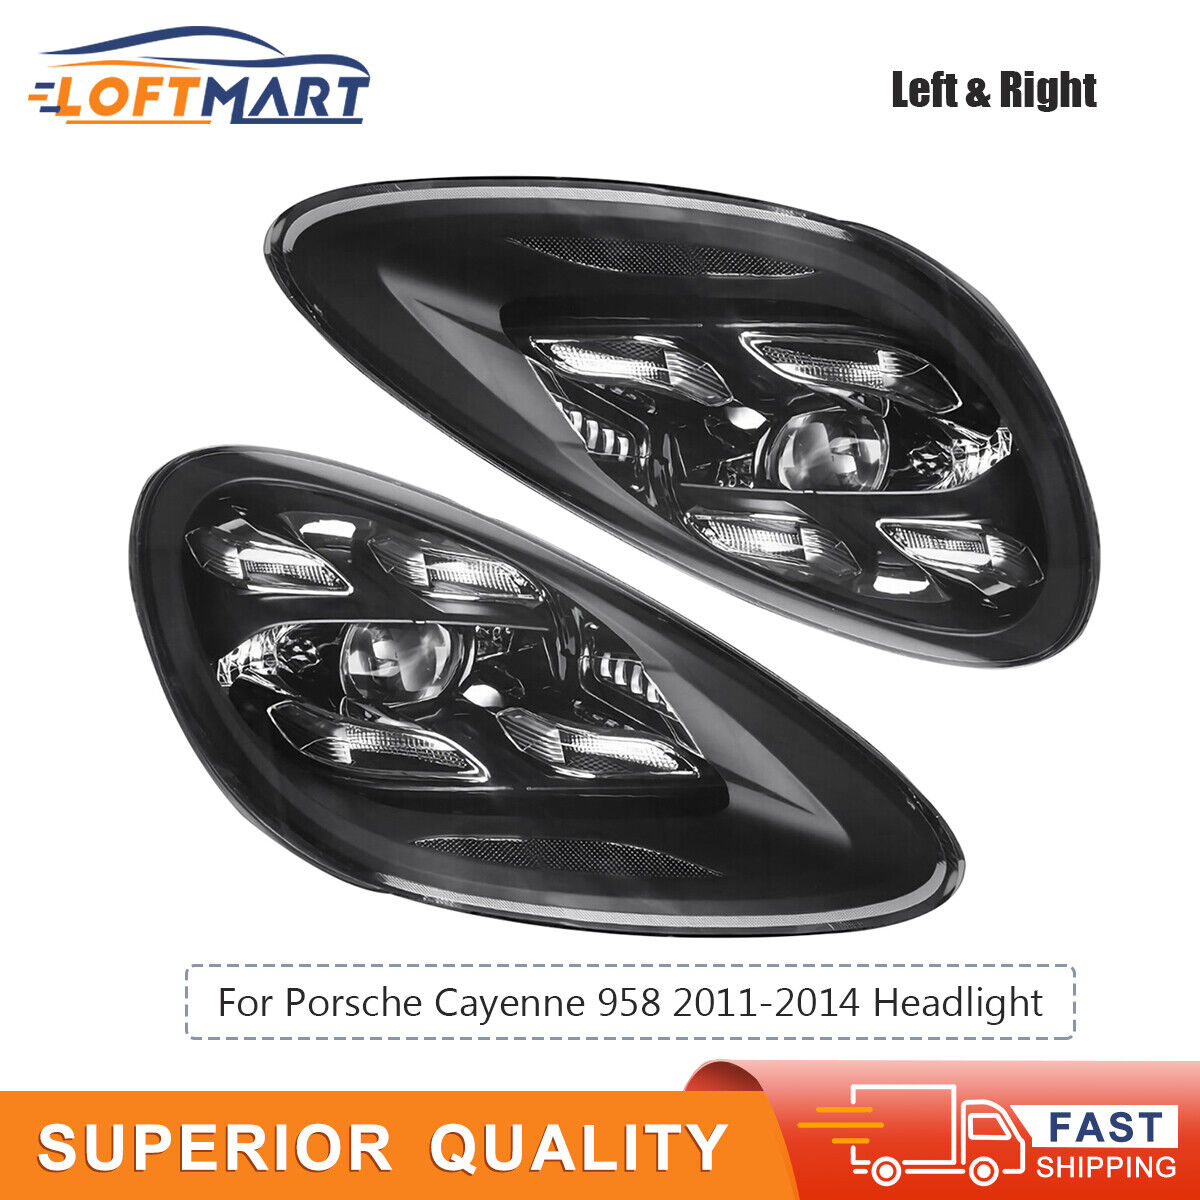 LEFT &RIGHT LED Headlight Assembly Front Lamps For Porsche Cayenne 958 2011-2014